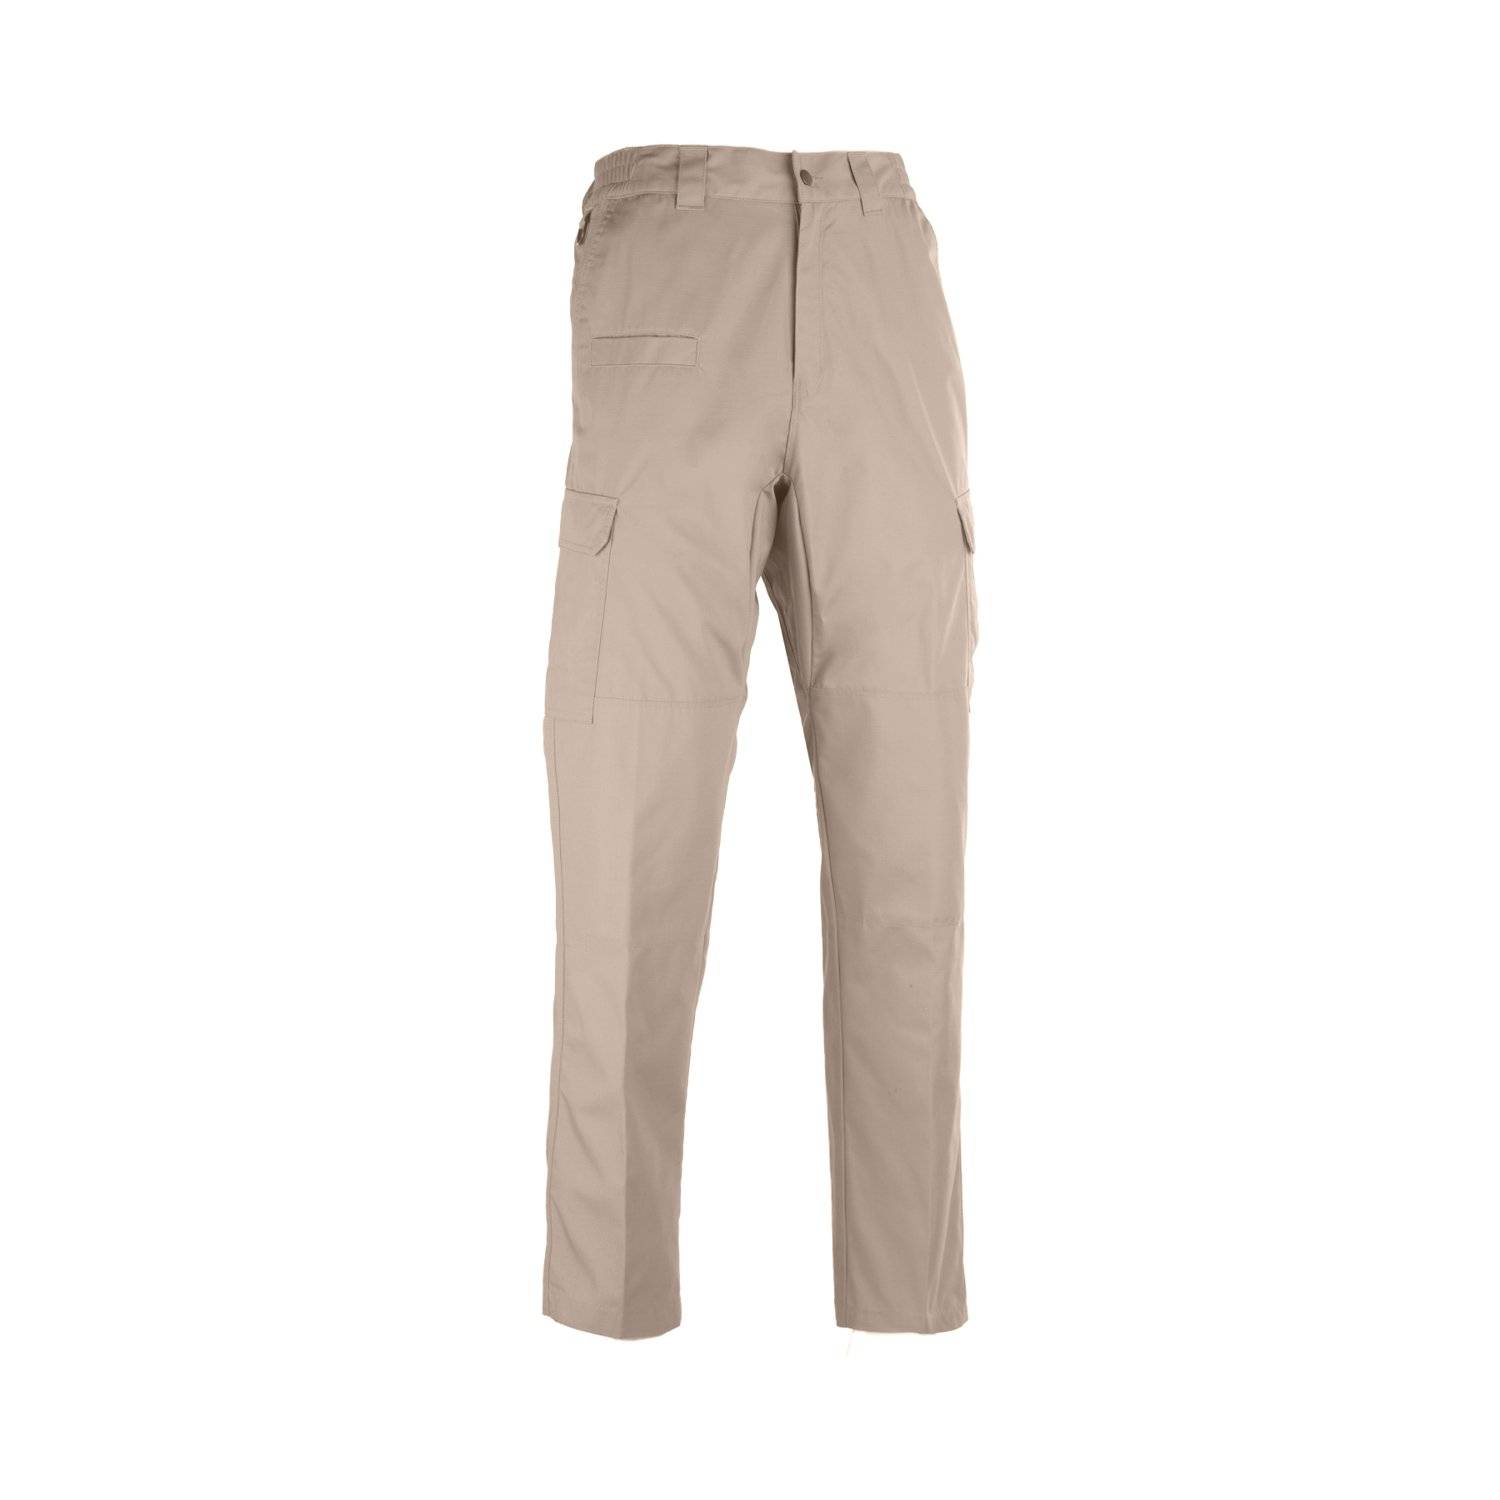 NWT Carhartt Men's Flame Resistant Cargo Pant Work Construction - Size 48 x  28 in 2023